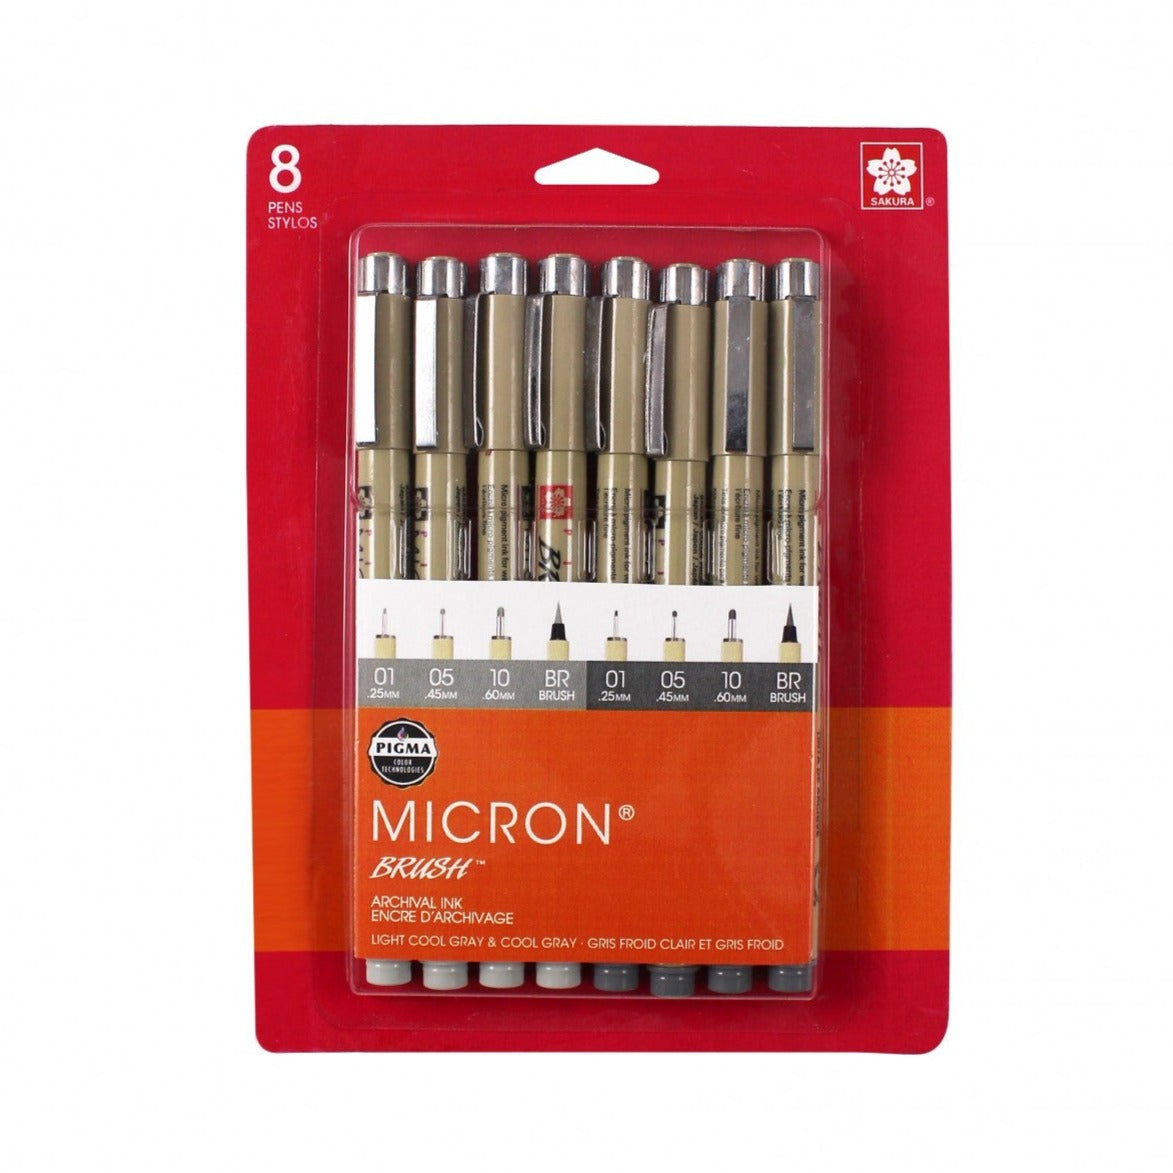 Pigma Micron Pen 8 Piece Set Lt Cool Gray and Cool Gray